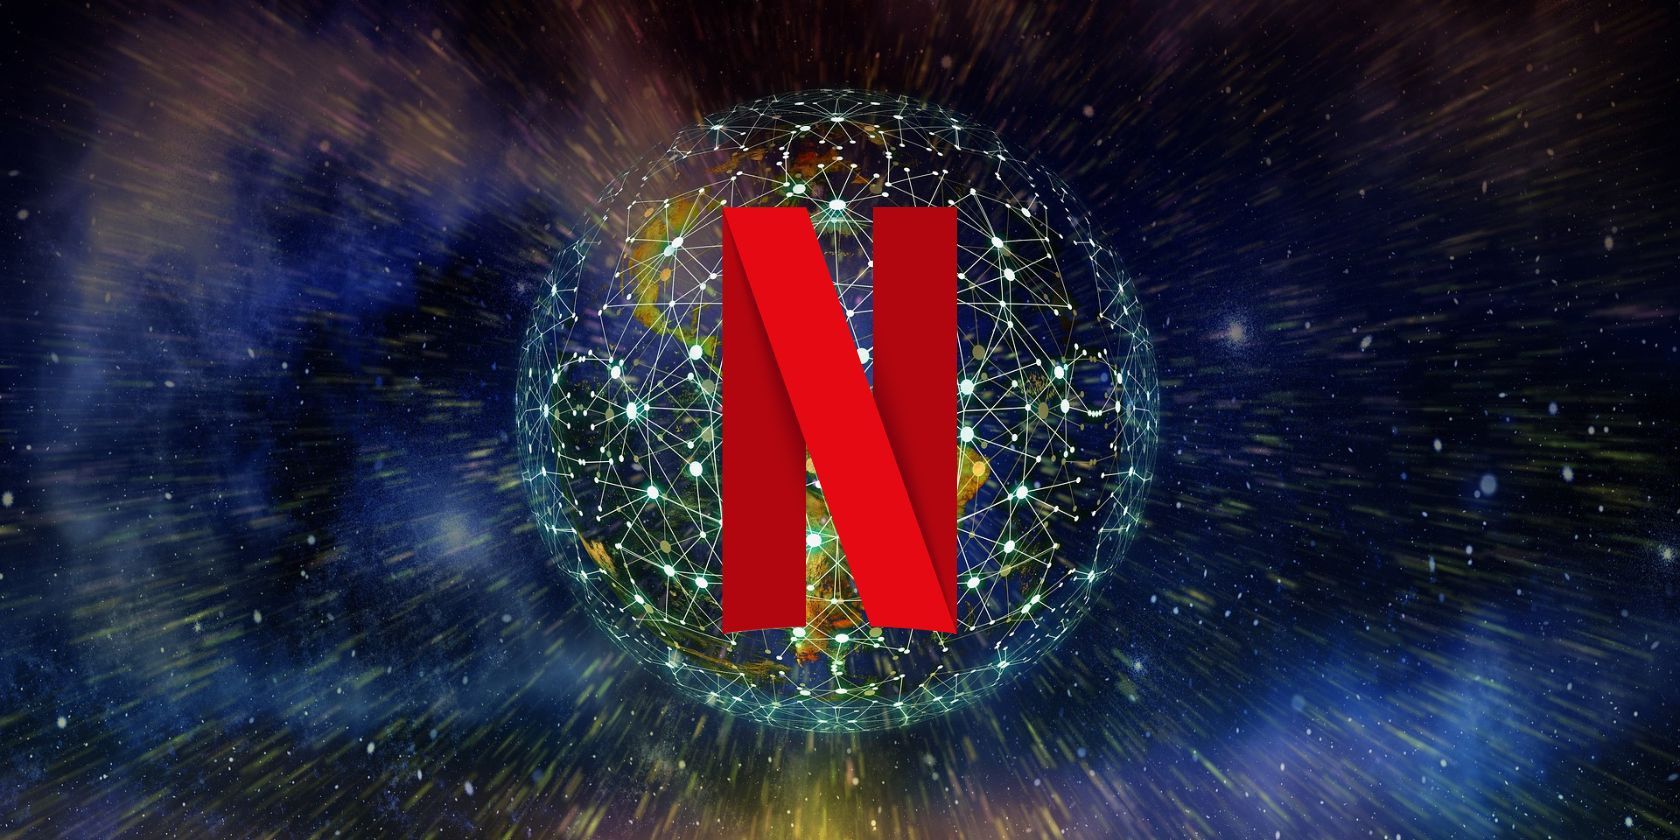 The planet surrounded in a digital blockchain with the Netflix logo in the middle of Earth